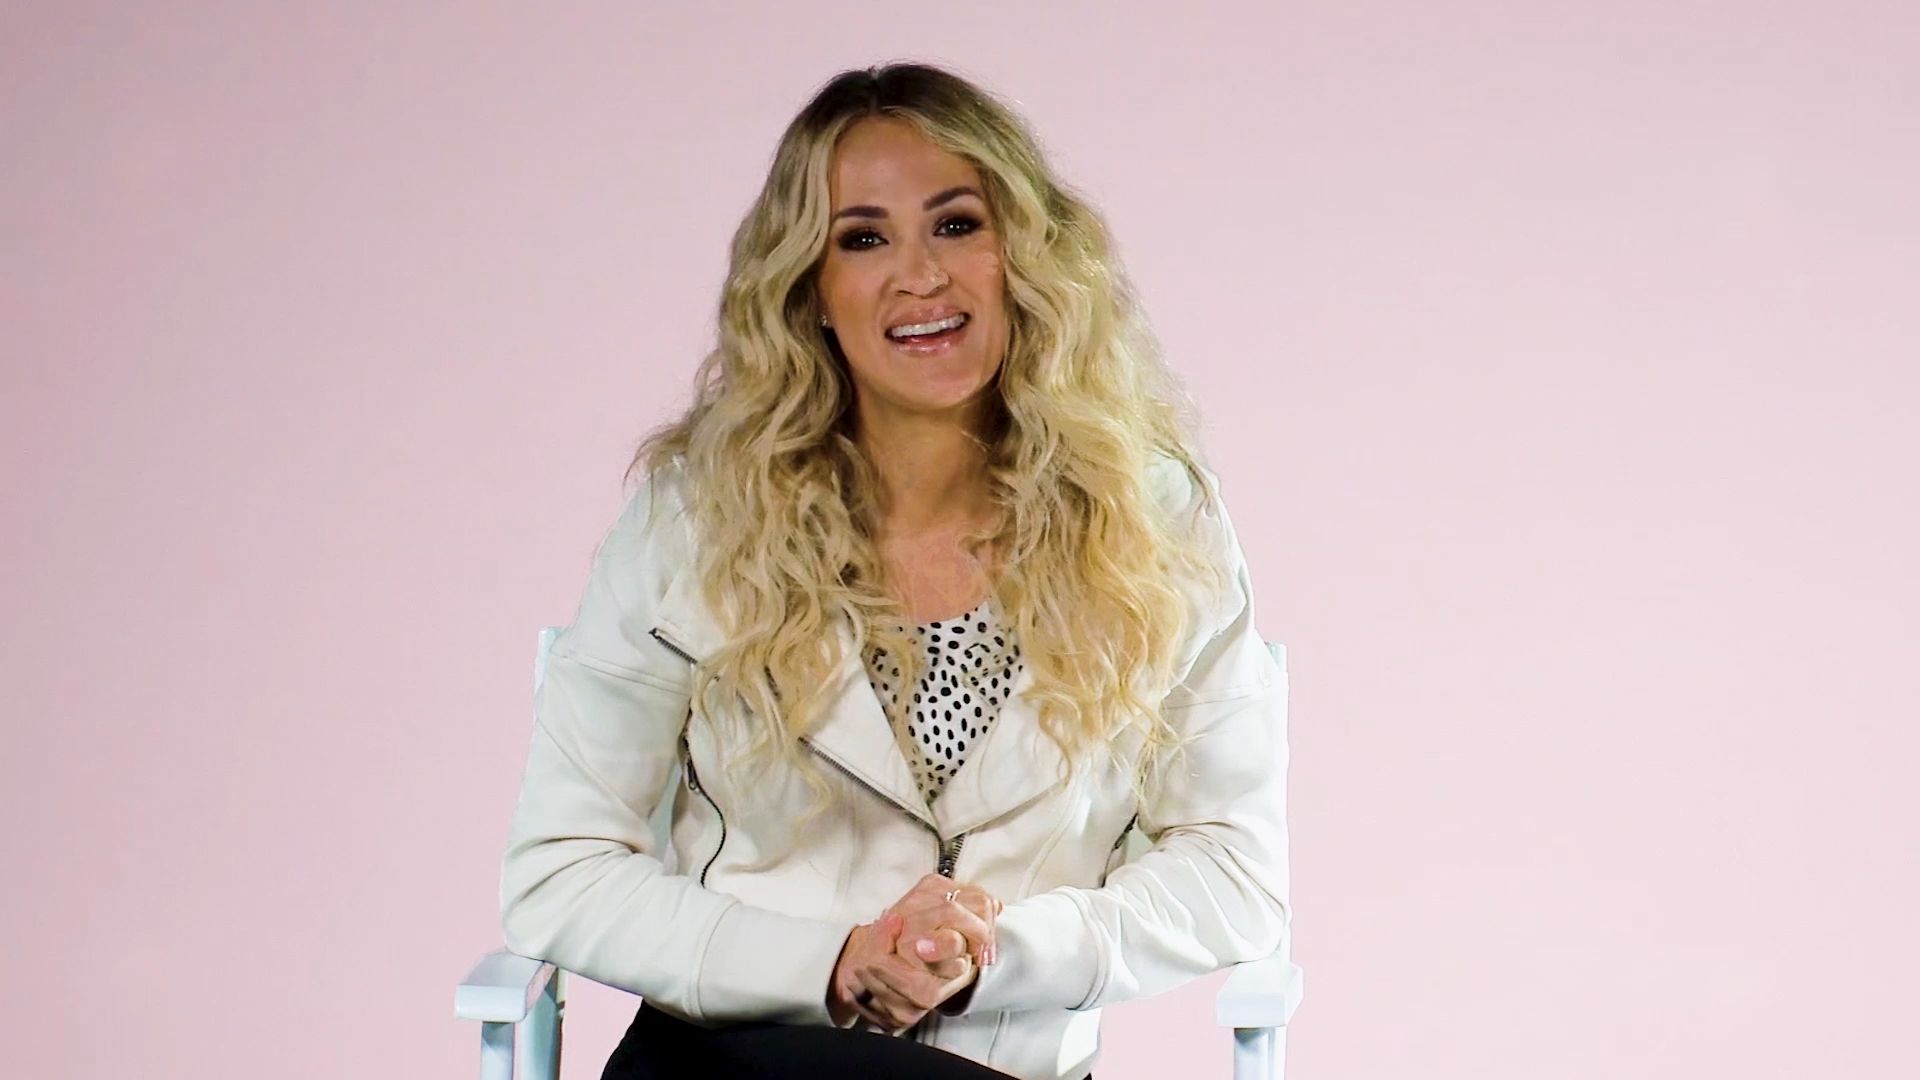 Carrie Underwood Is Sculpted Leg Goals In Short Shorts In IG Video pic image